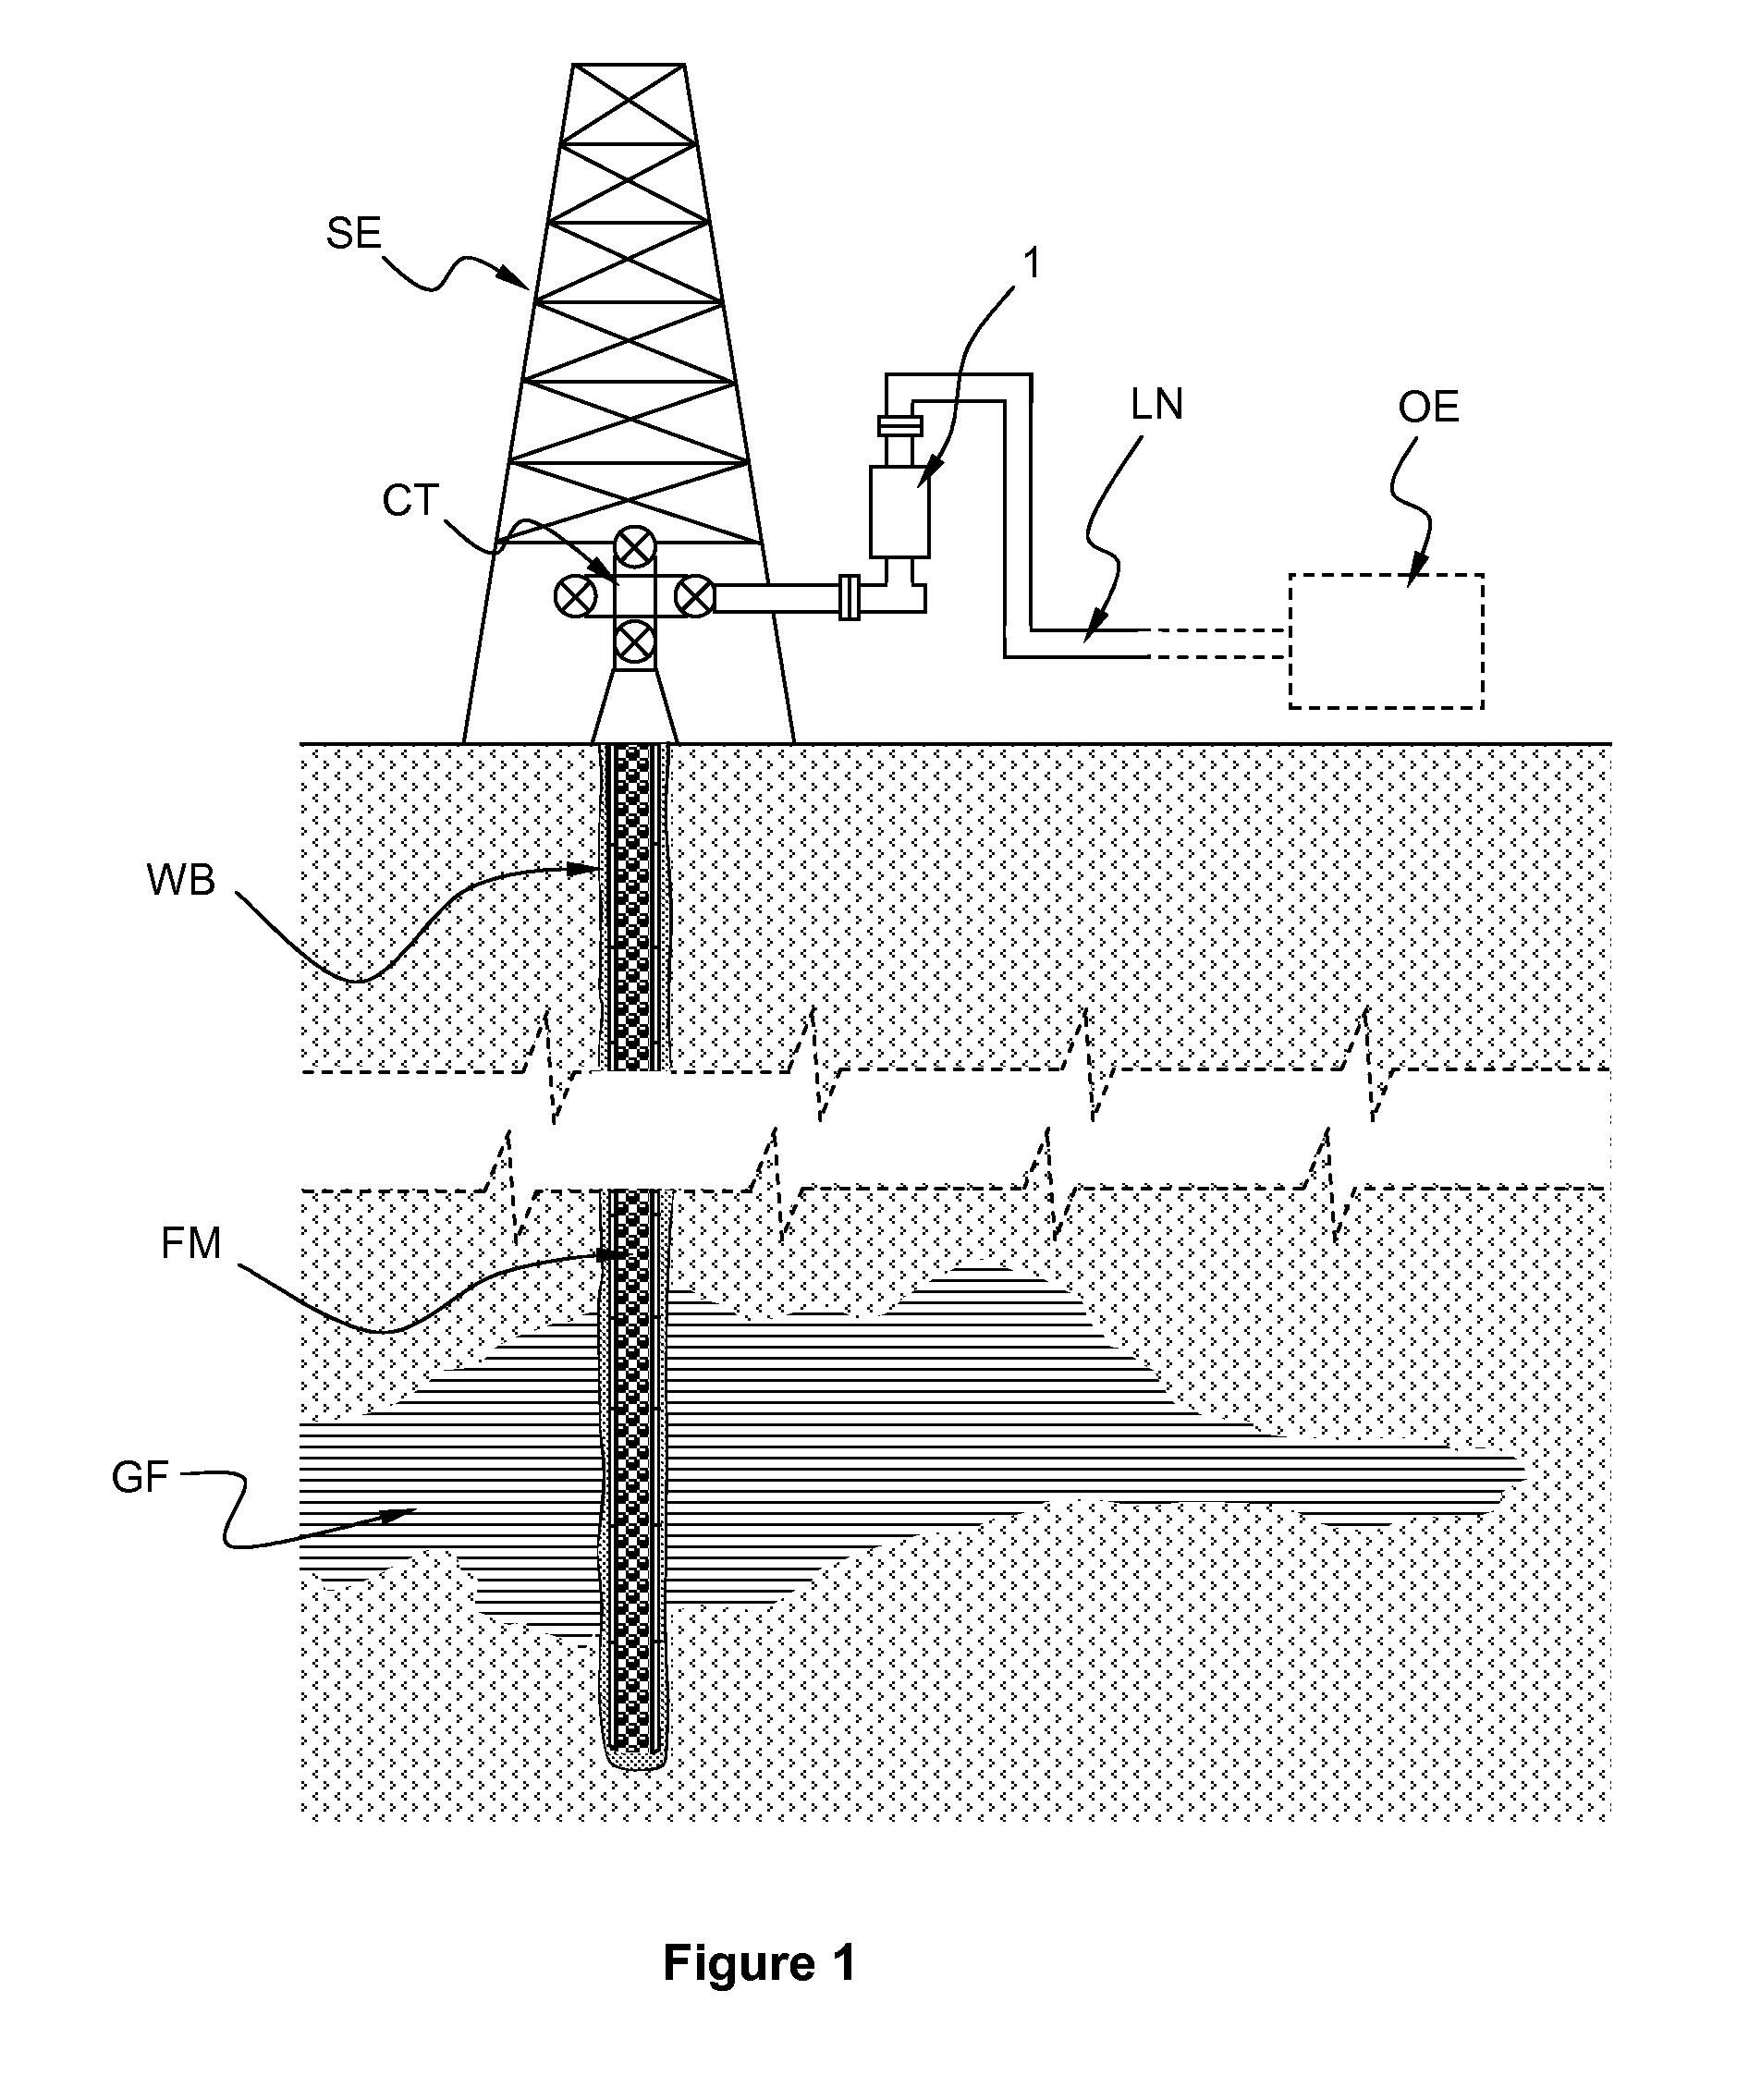 Apparatus and method for determining a characteristic ratio and a parameter affecting the characterisitic ratio of a multiphase fluid mixture